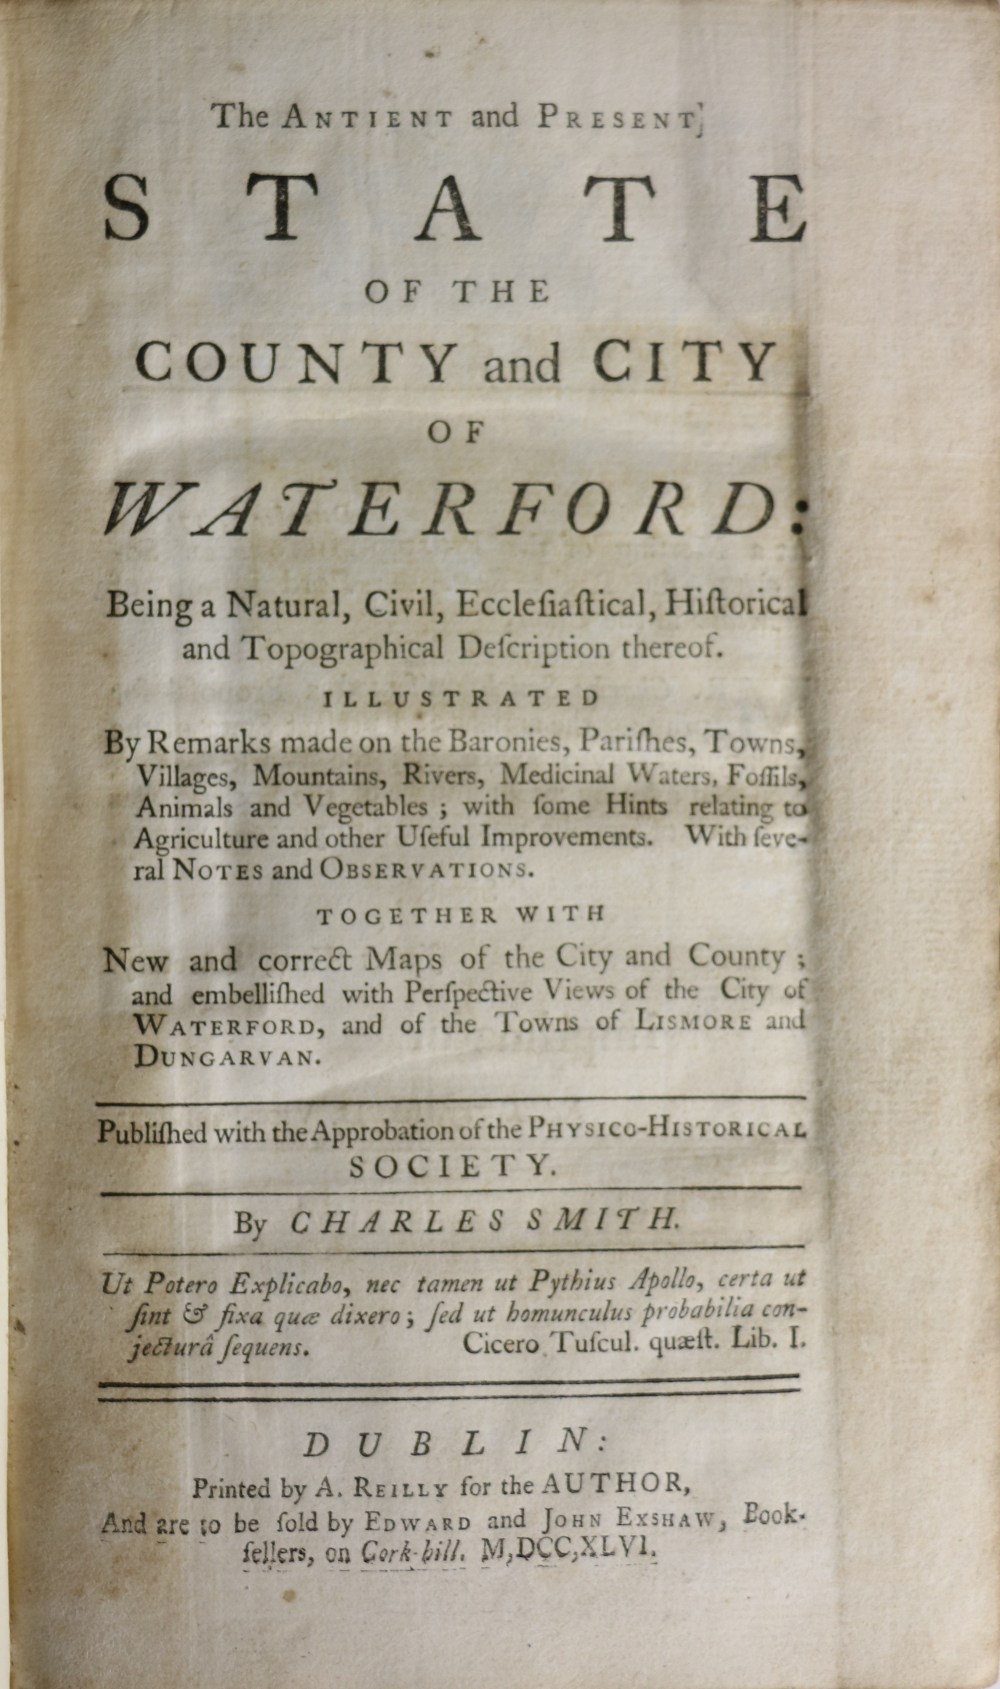 Smith (Charles) The Ancient and Present State of the County and City of Waterford, 8vo D. 1746.